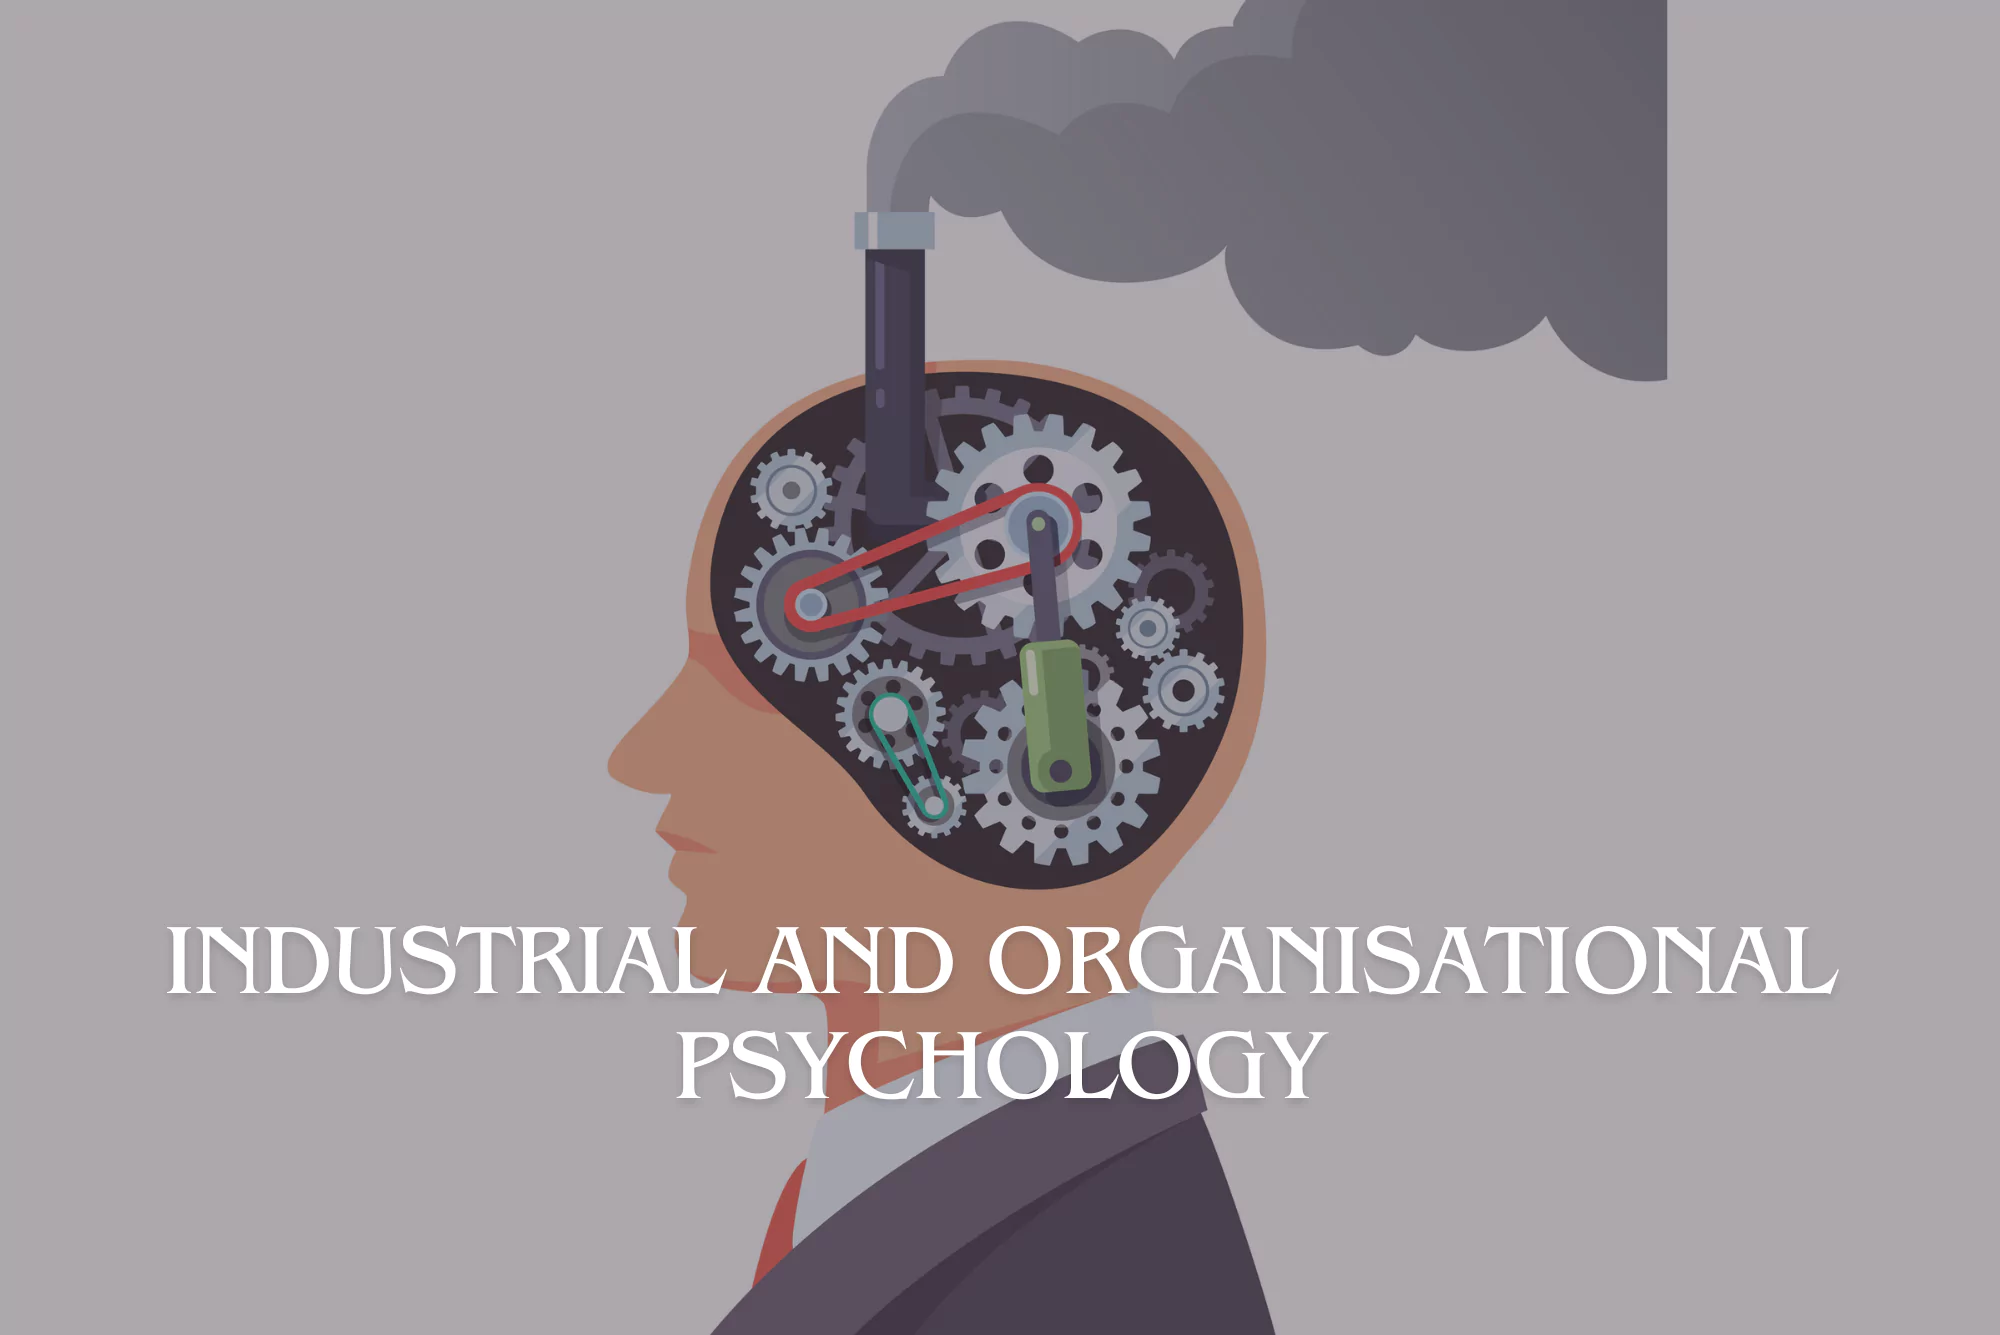 This image represents the concept of Industrial and Organisational Psychology by showing a human head filled with gears and machinery.